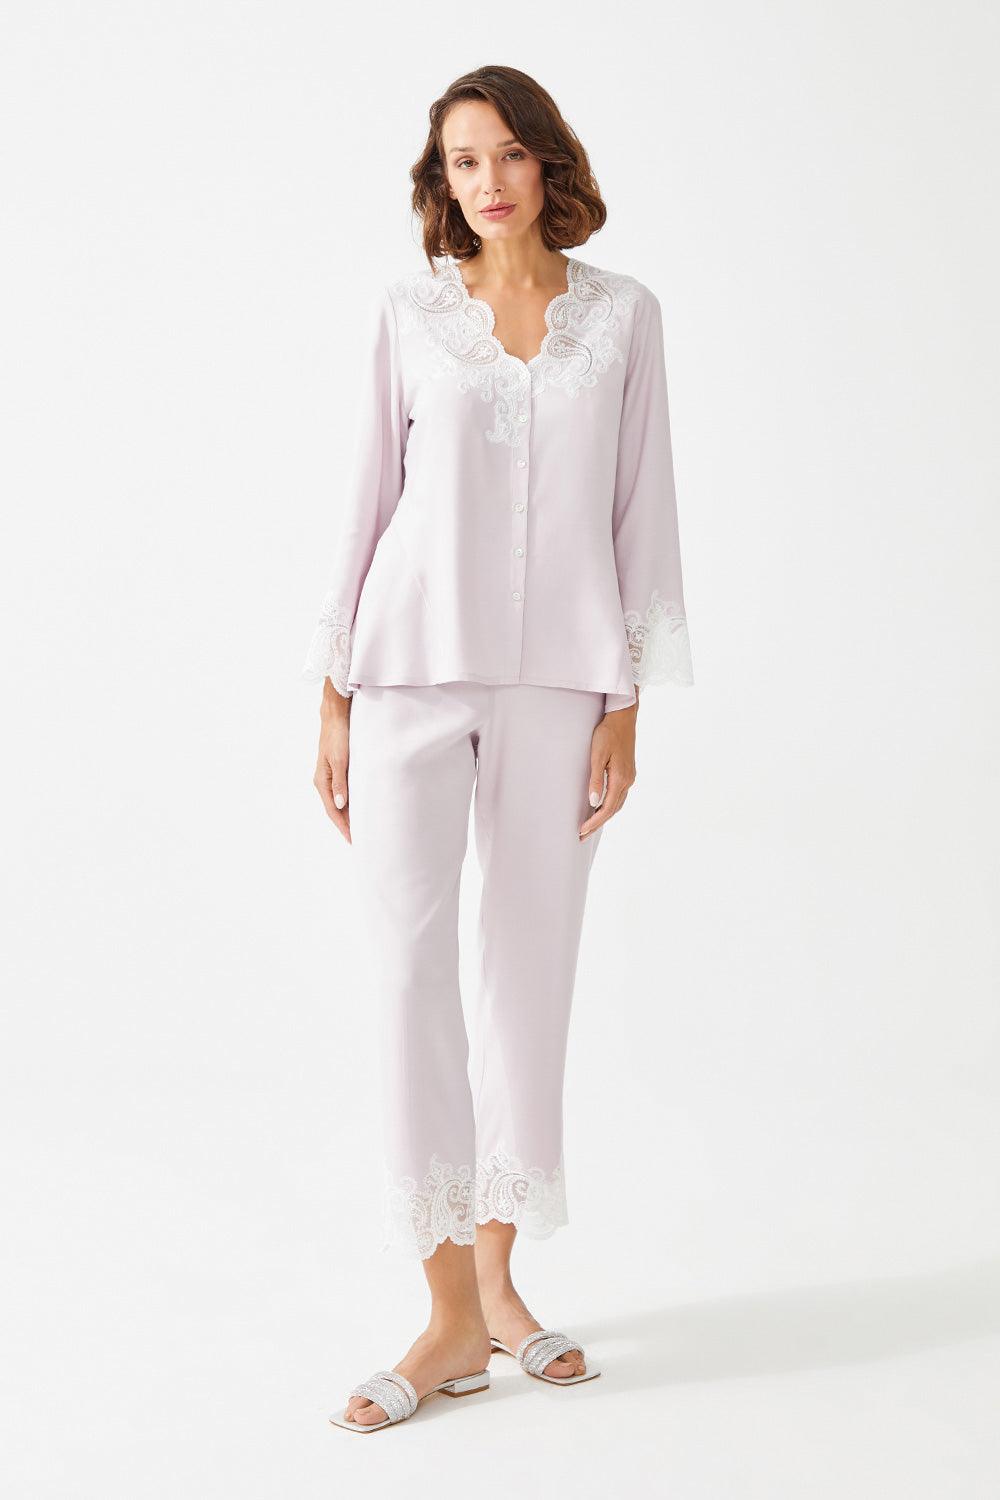 Ume Trimmed Rayon Full Buttoned Long Sleeve Pyjama Set - Baby Pink - Bocan